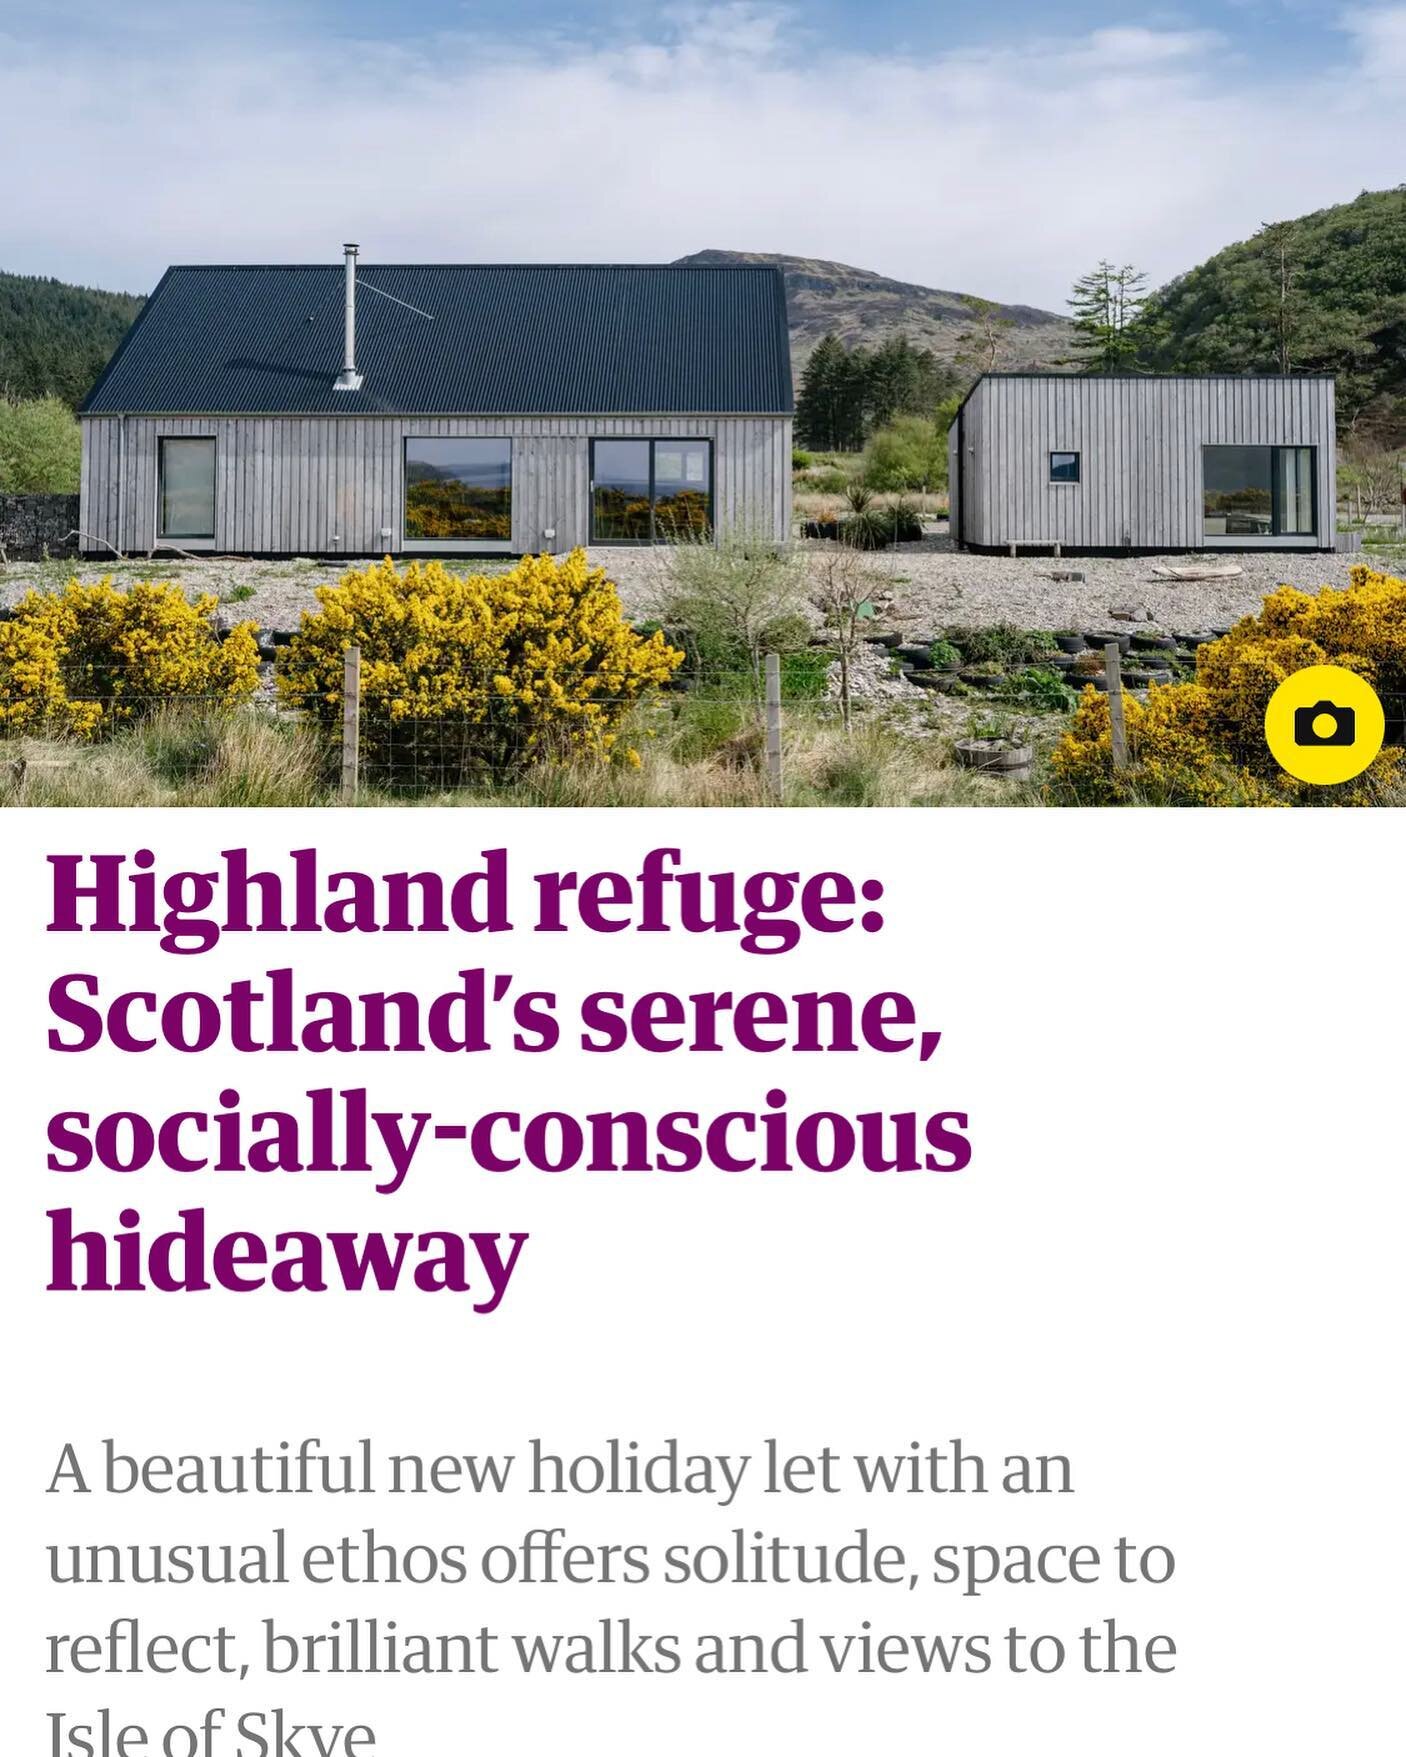 Wonderful write up in today&rsquo;s Guardian, @rhiannonbatten really capturing the ethos of what Taigh Whin is about. Please share with all friends working for the common good in Scotland. Dates are available from mid February 2024&hellip;